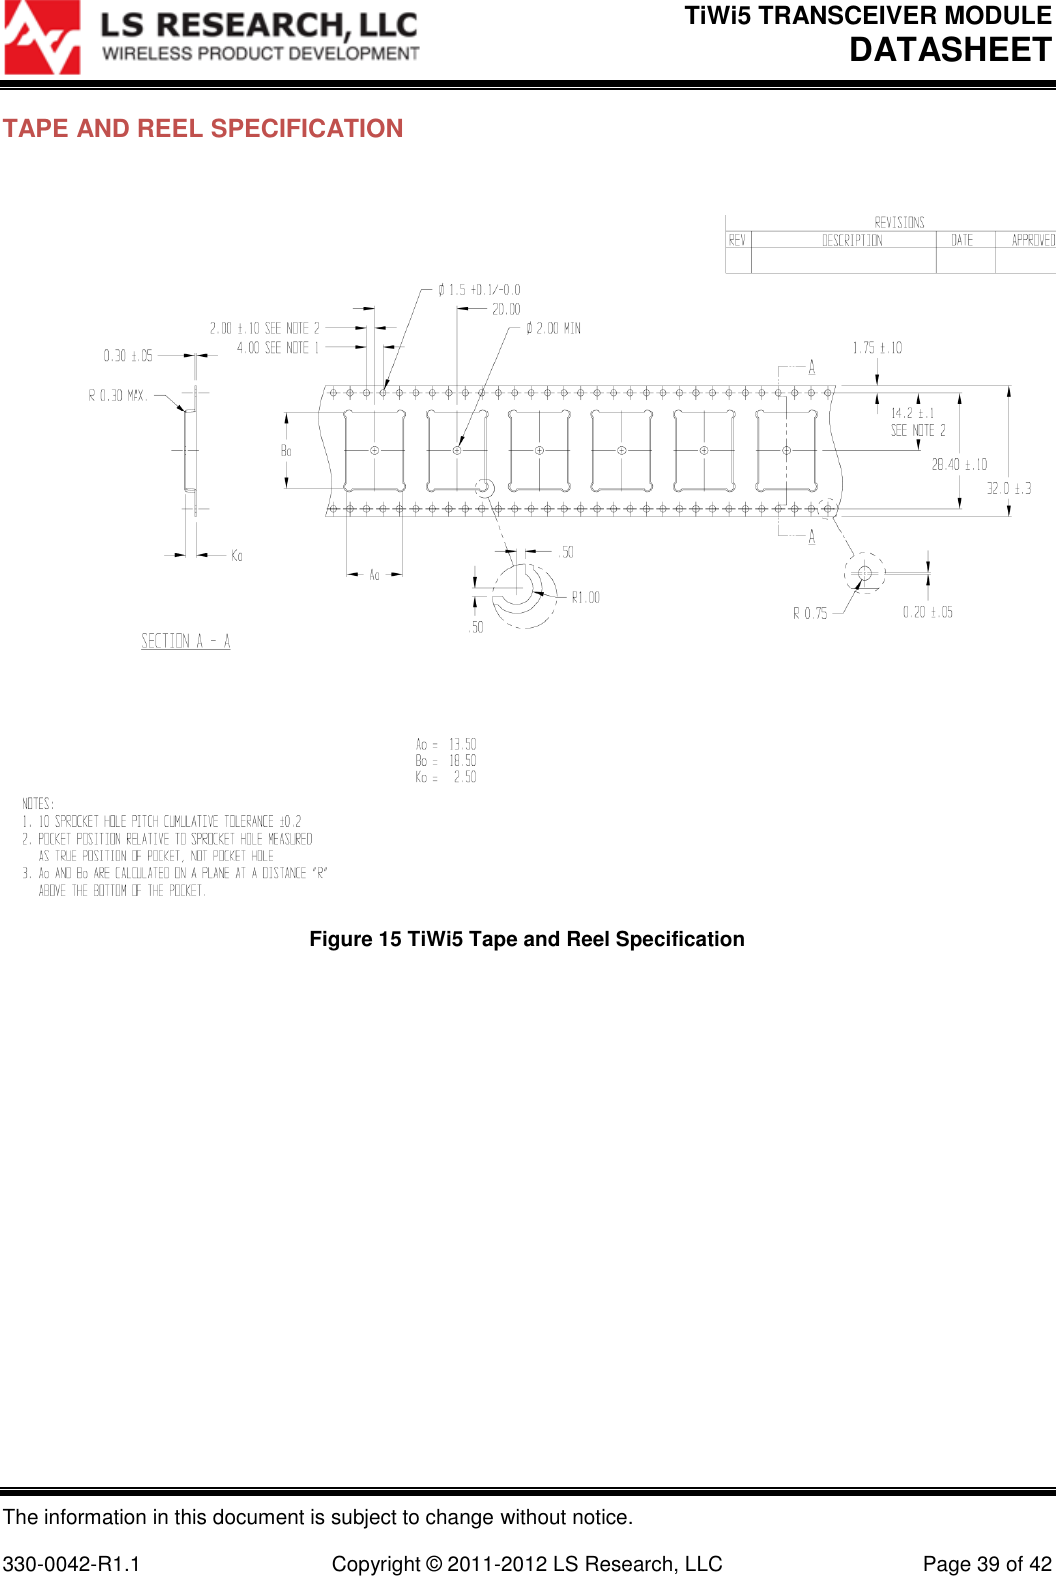 TiWi5 TRANSCEIVER MODULE DATASHEET  The information in this document is subject to change without notice.  330-0042-R1.1    Copyright © 2011-2012 LS Research, LLC  Page 39 of 42 TAPE AND REEL SPECIFICATION   Figure 15 TiWi5 Tape and Reel Specification   